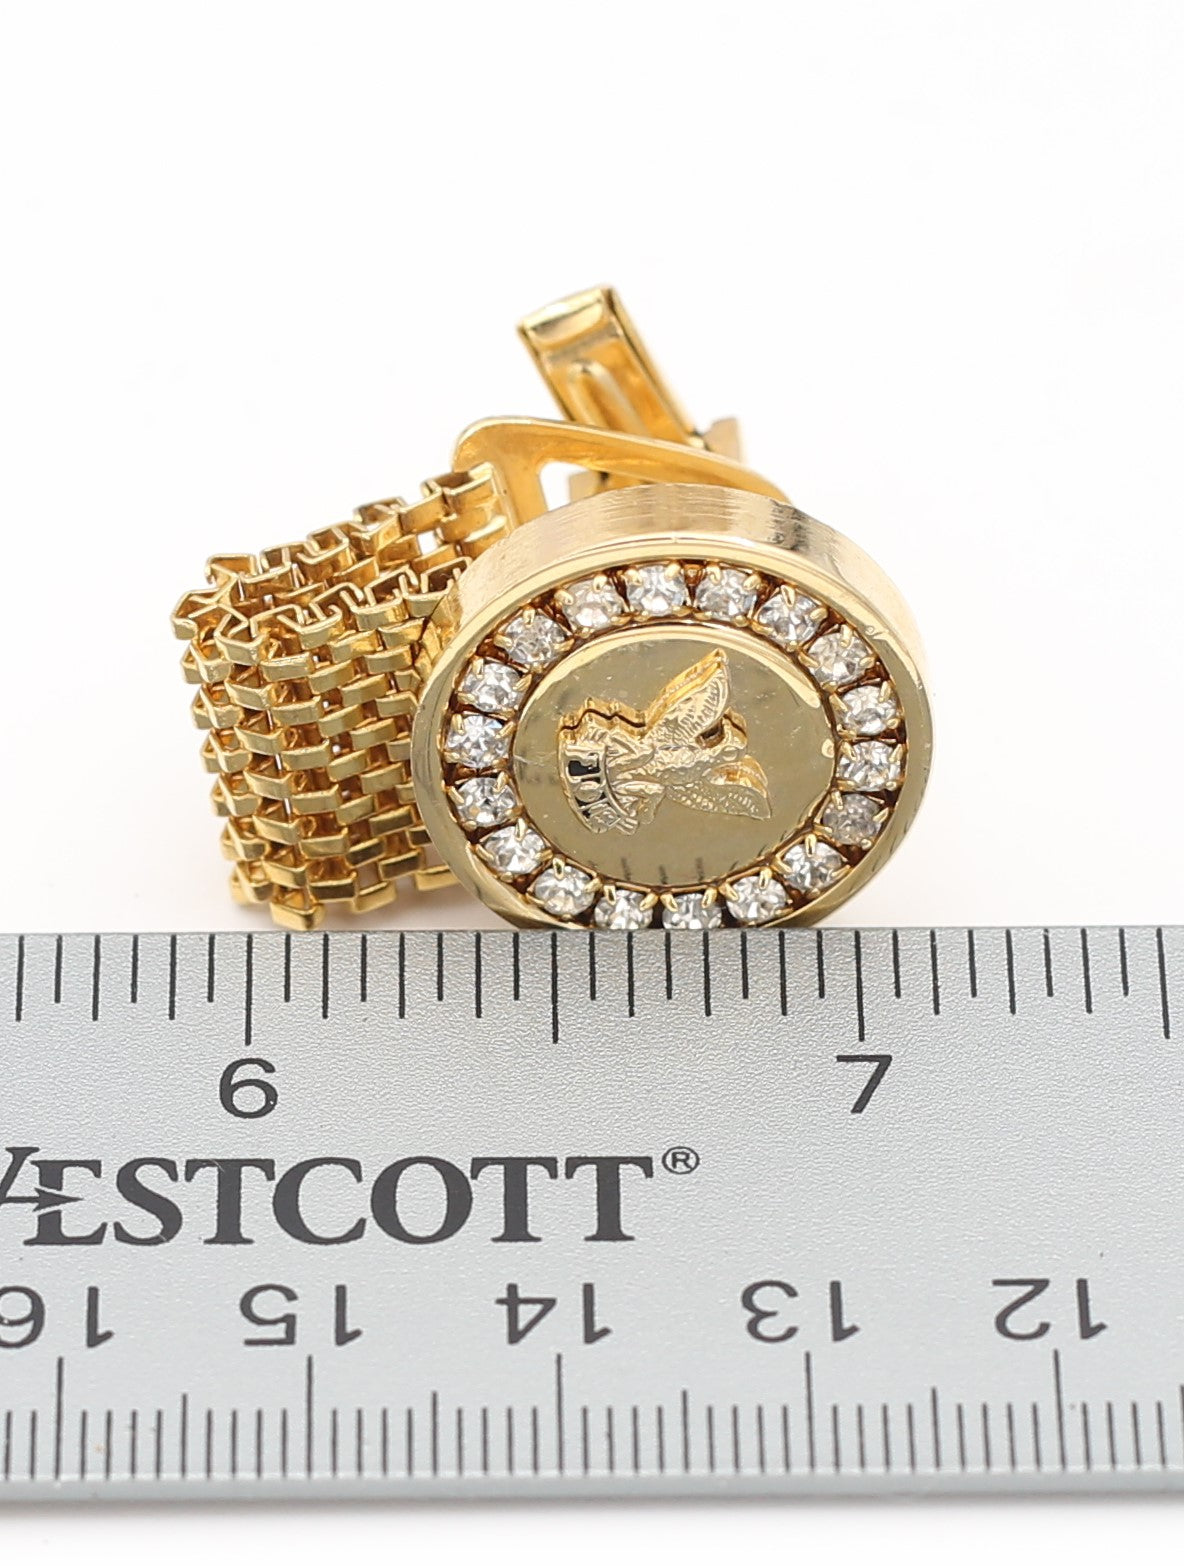 Gold Plated Eagle Cuff Links with cubic zirconia diamonds